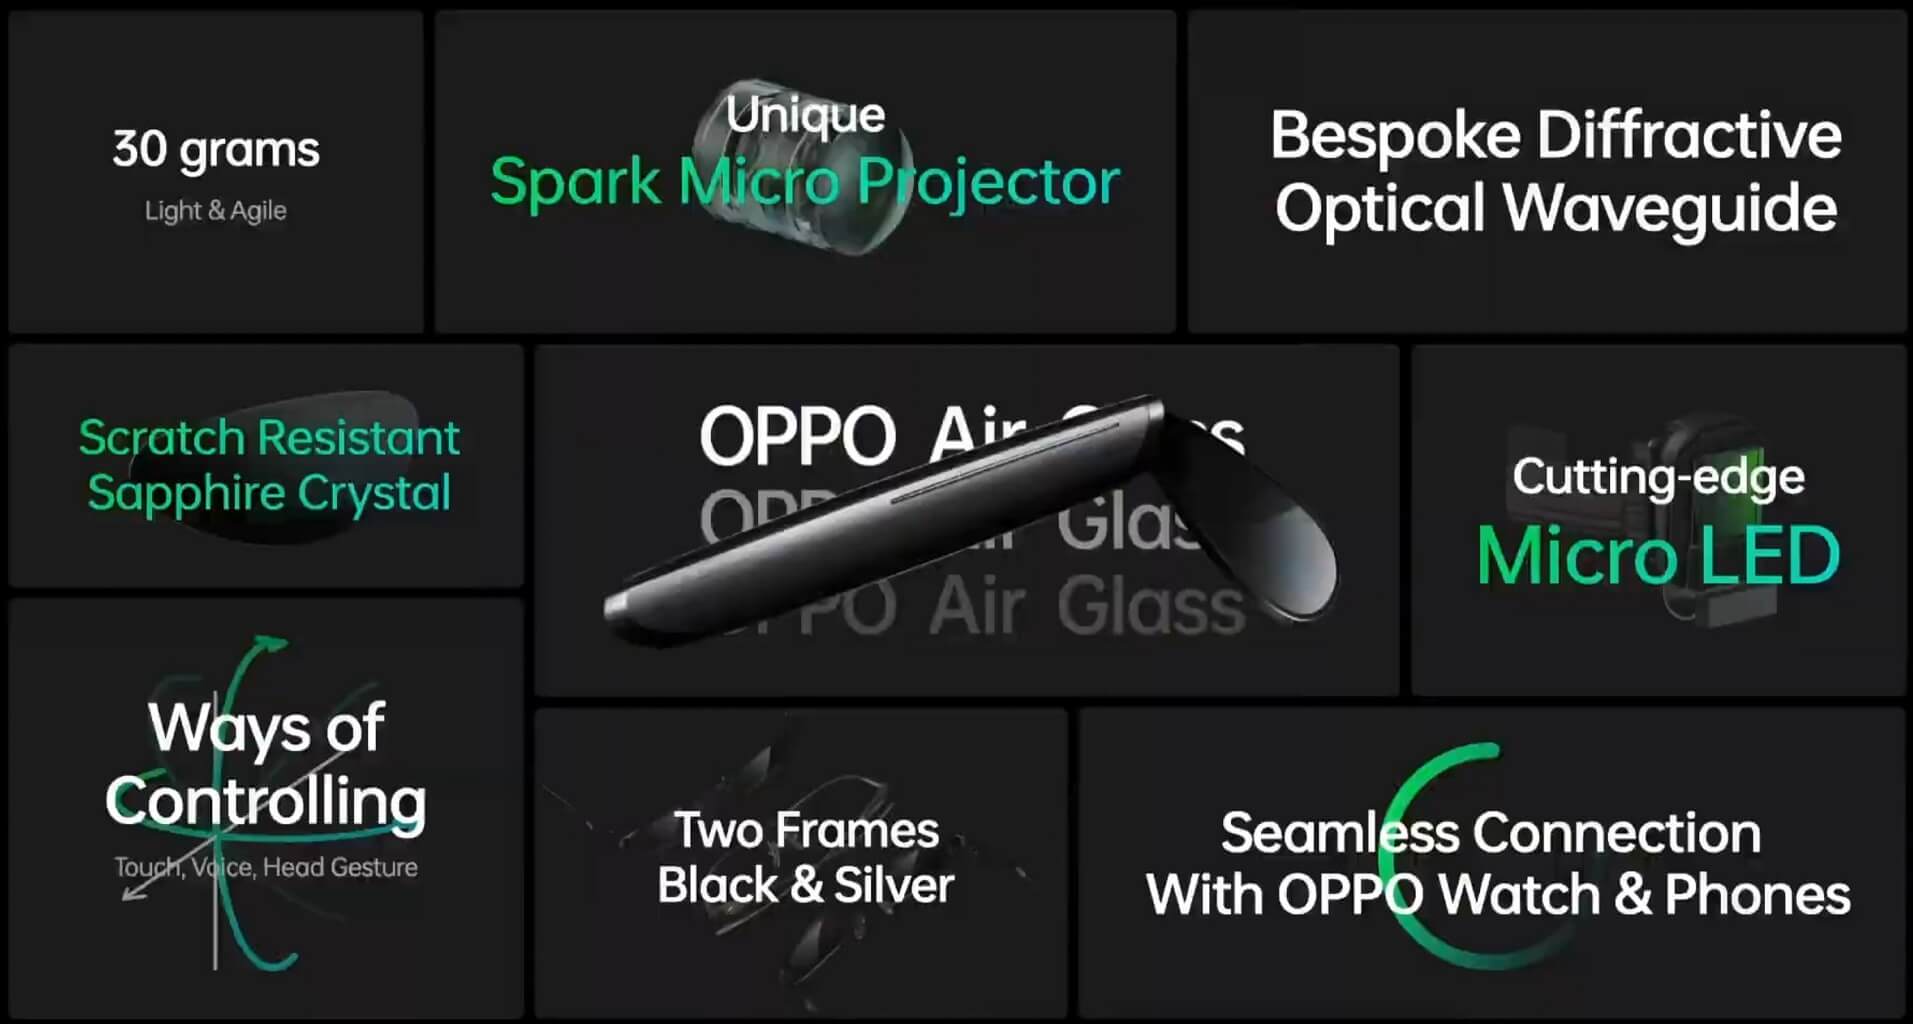 OPPO Air Glass features